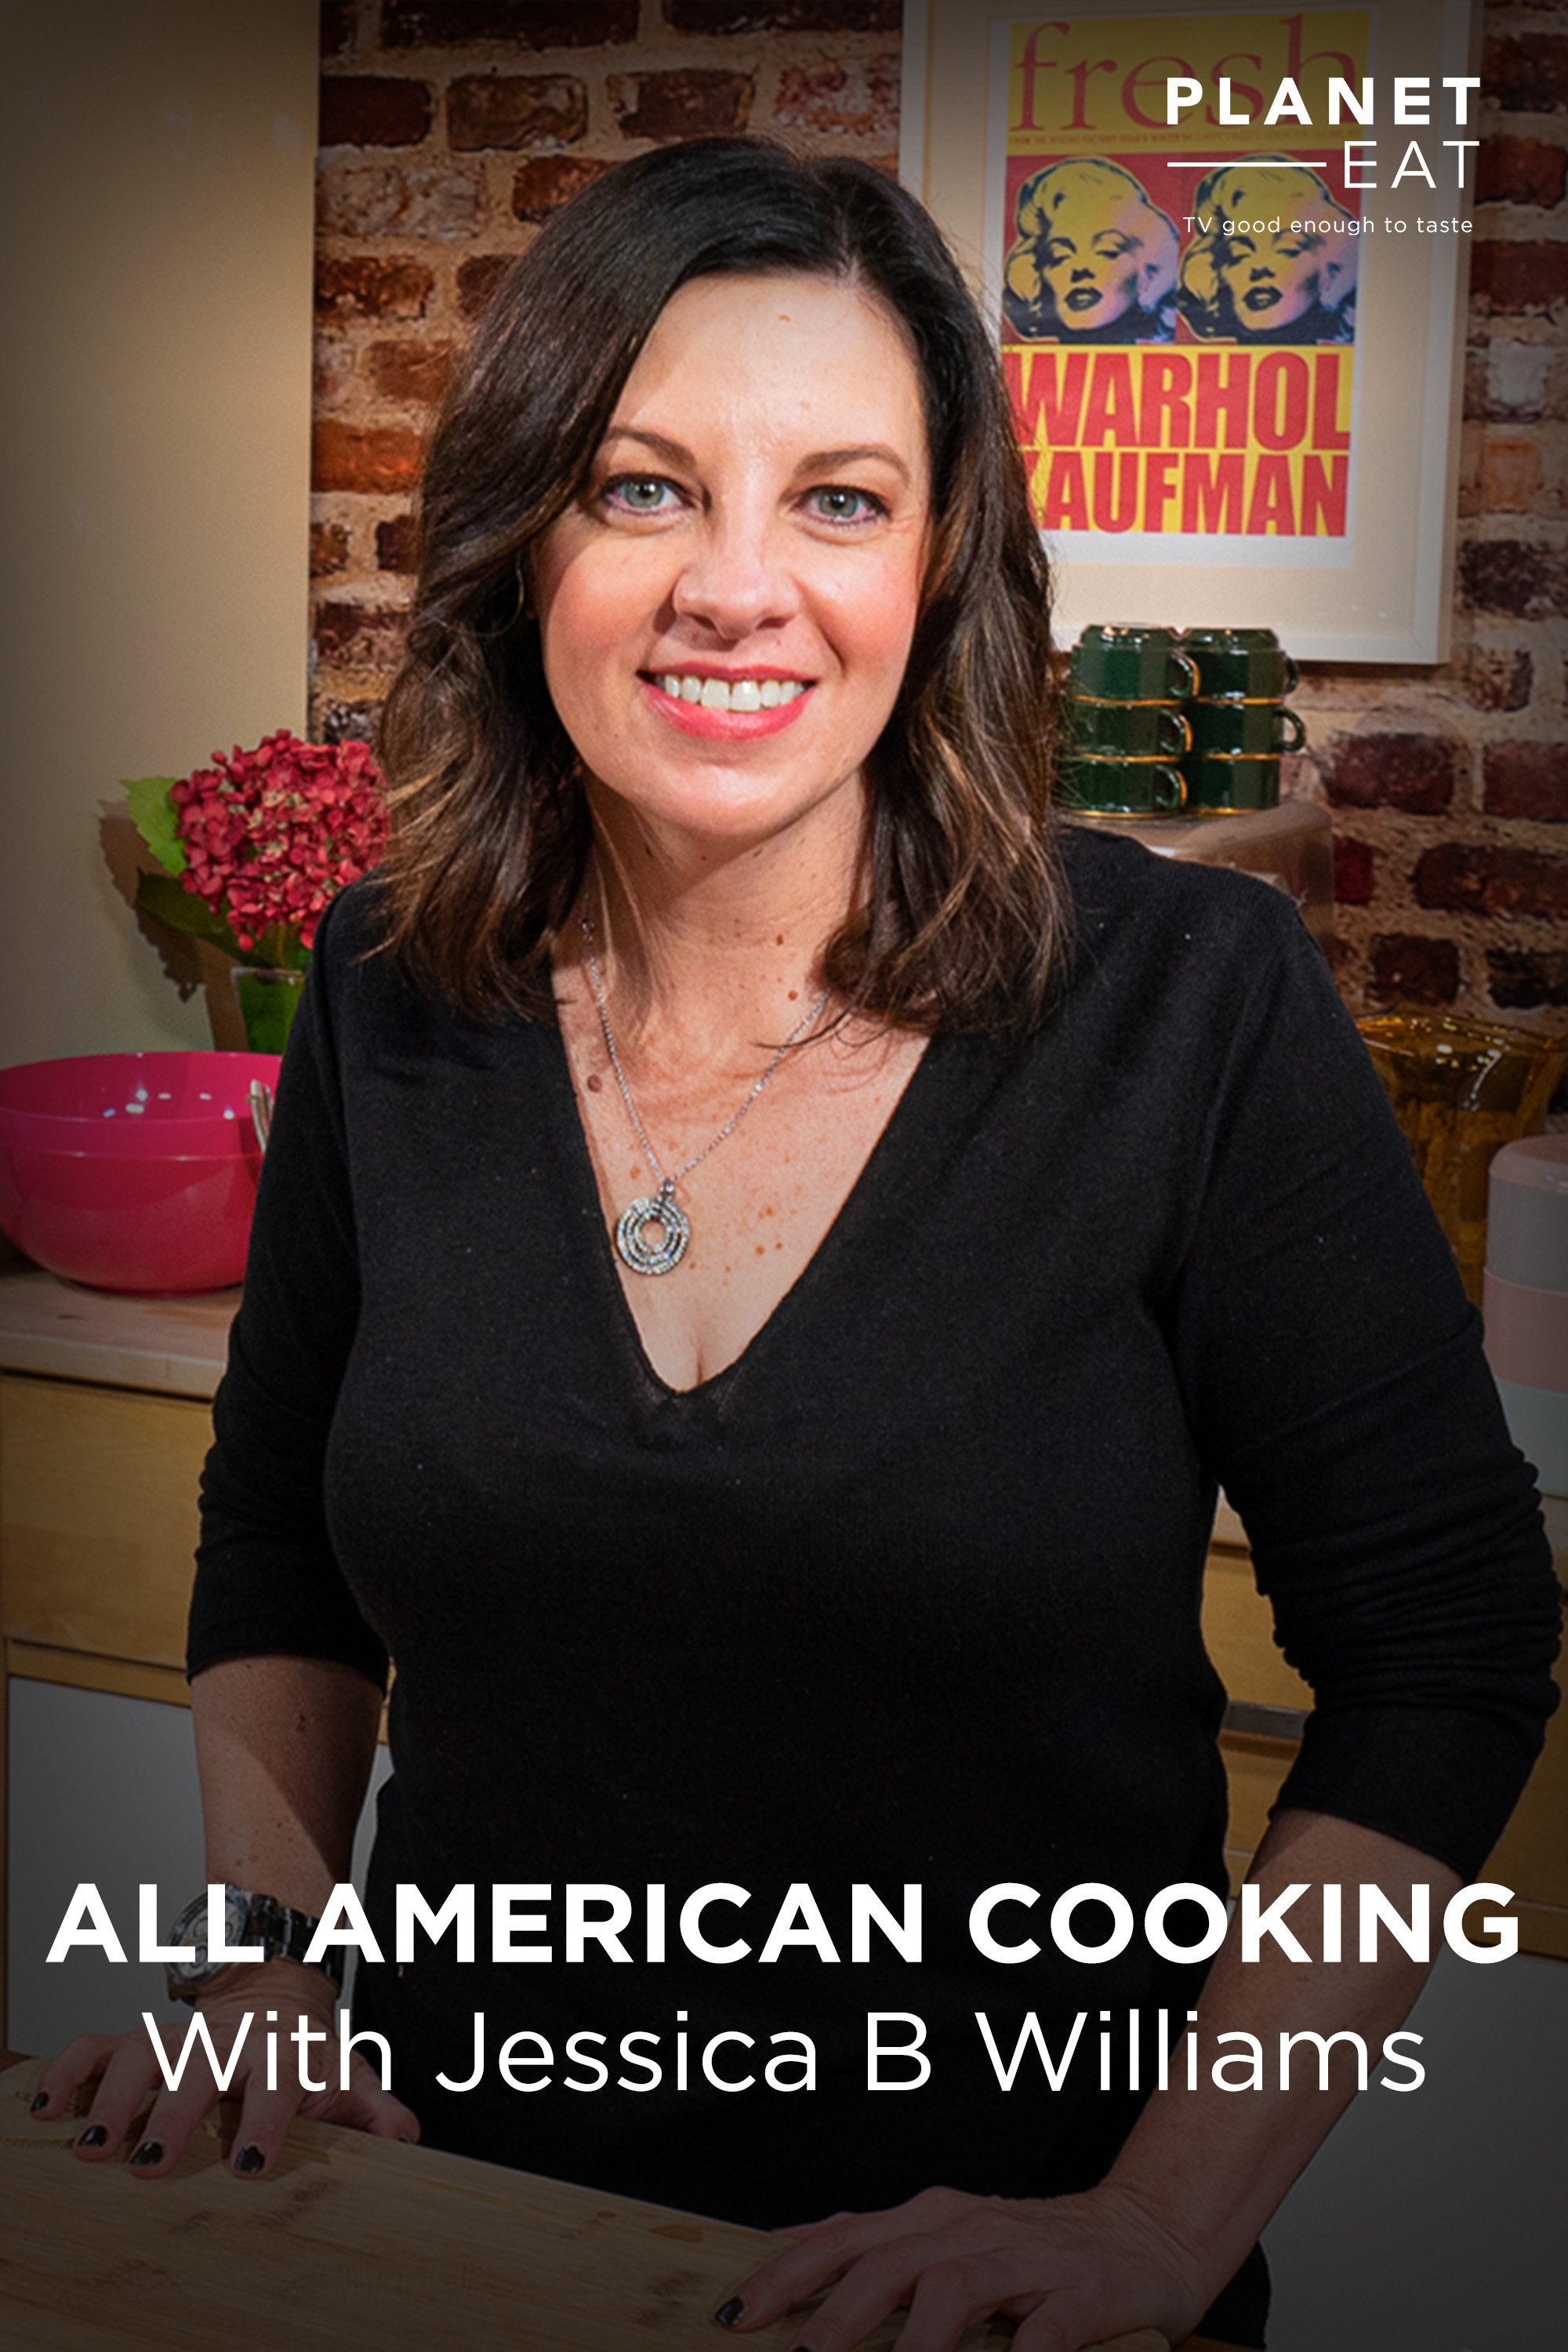 All American Cooking